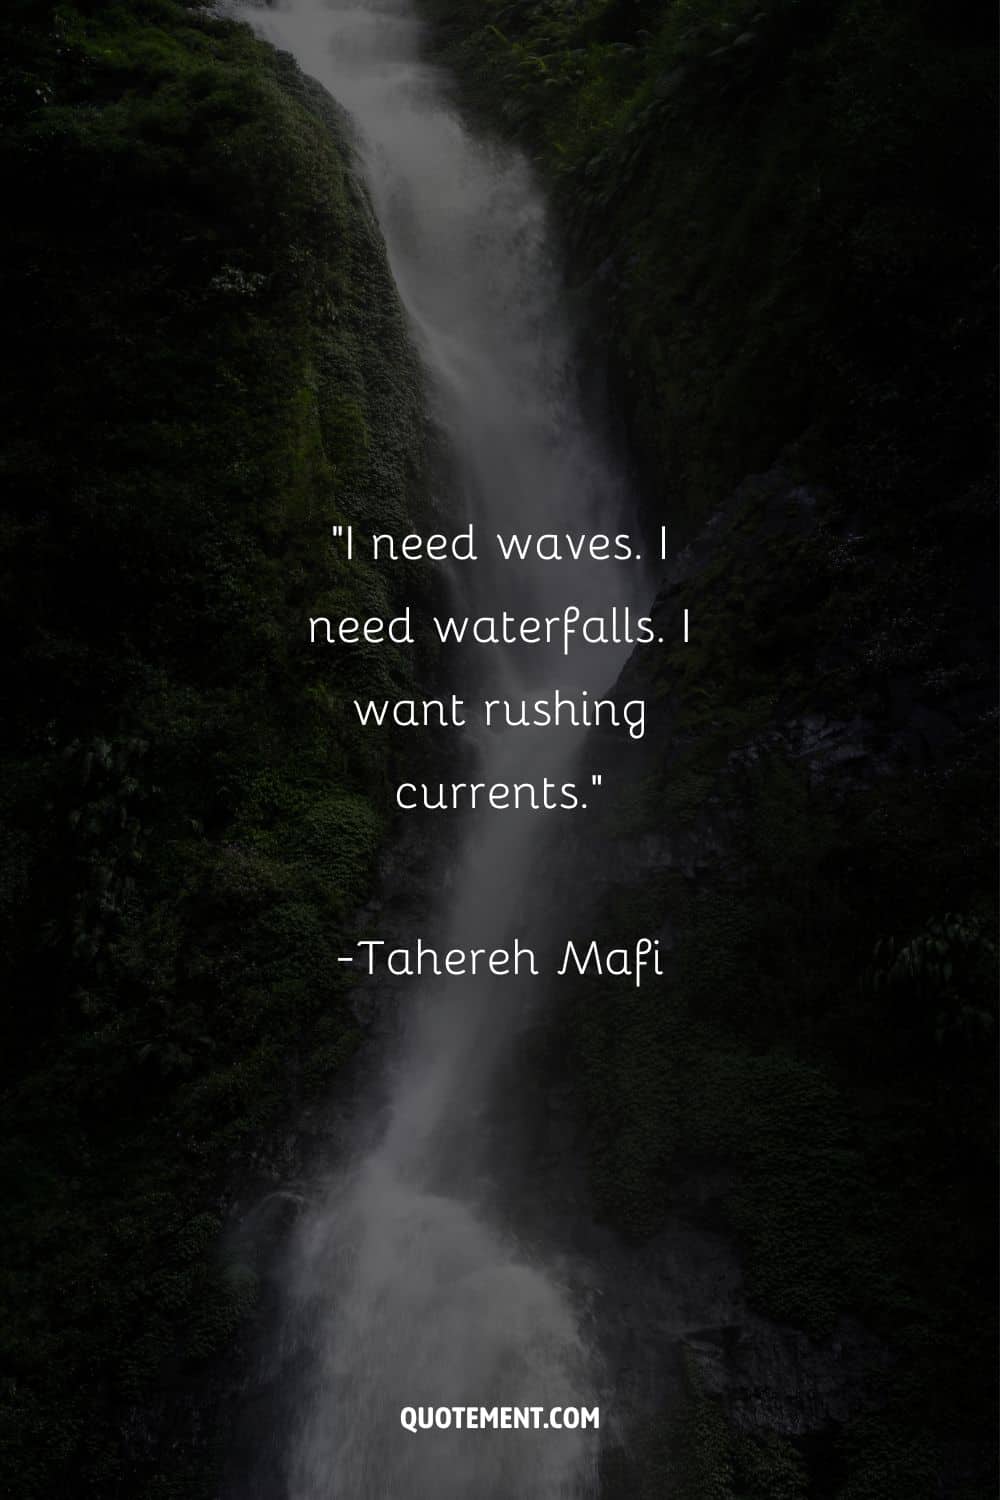 Powerful quote by Tahereh Mafi and a waterfall in the background
